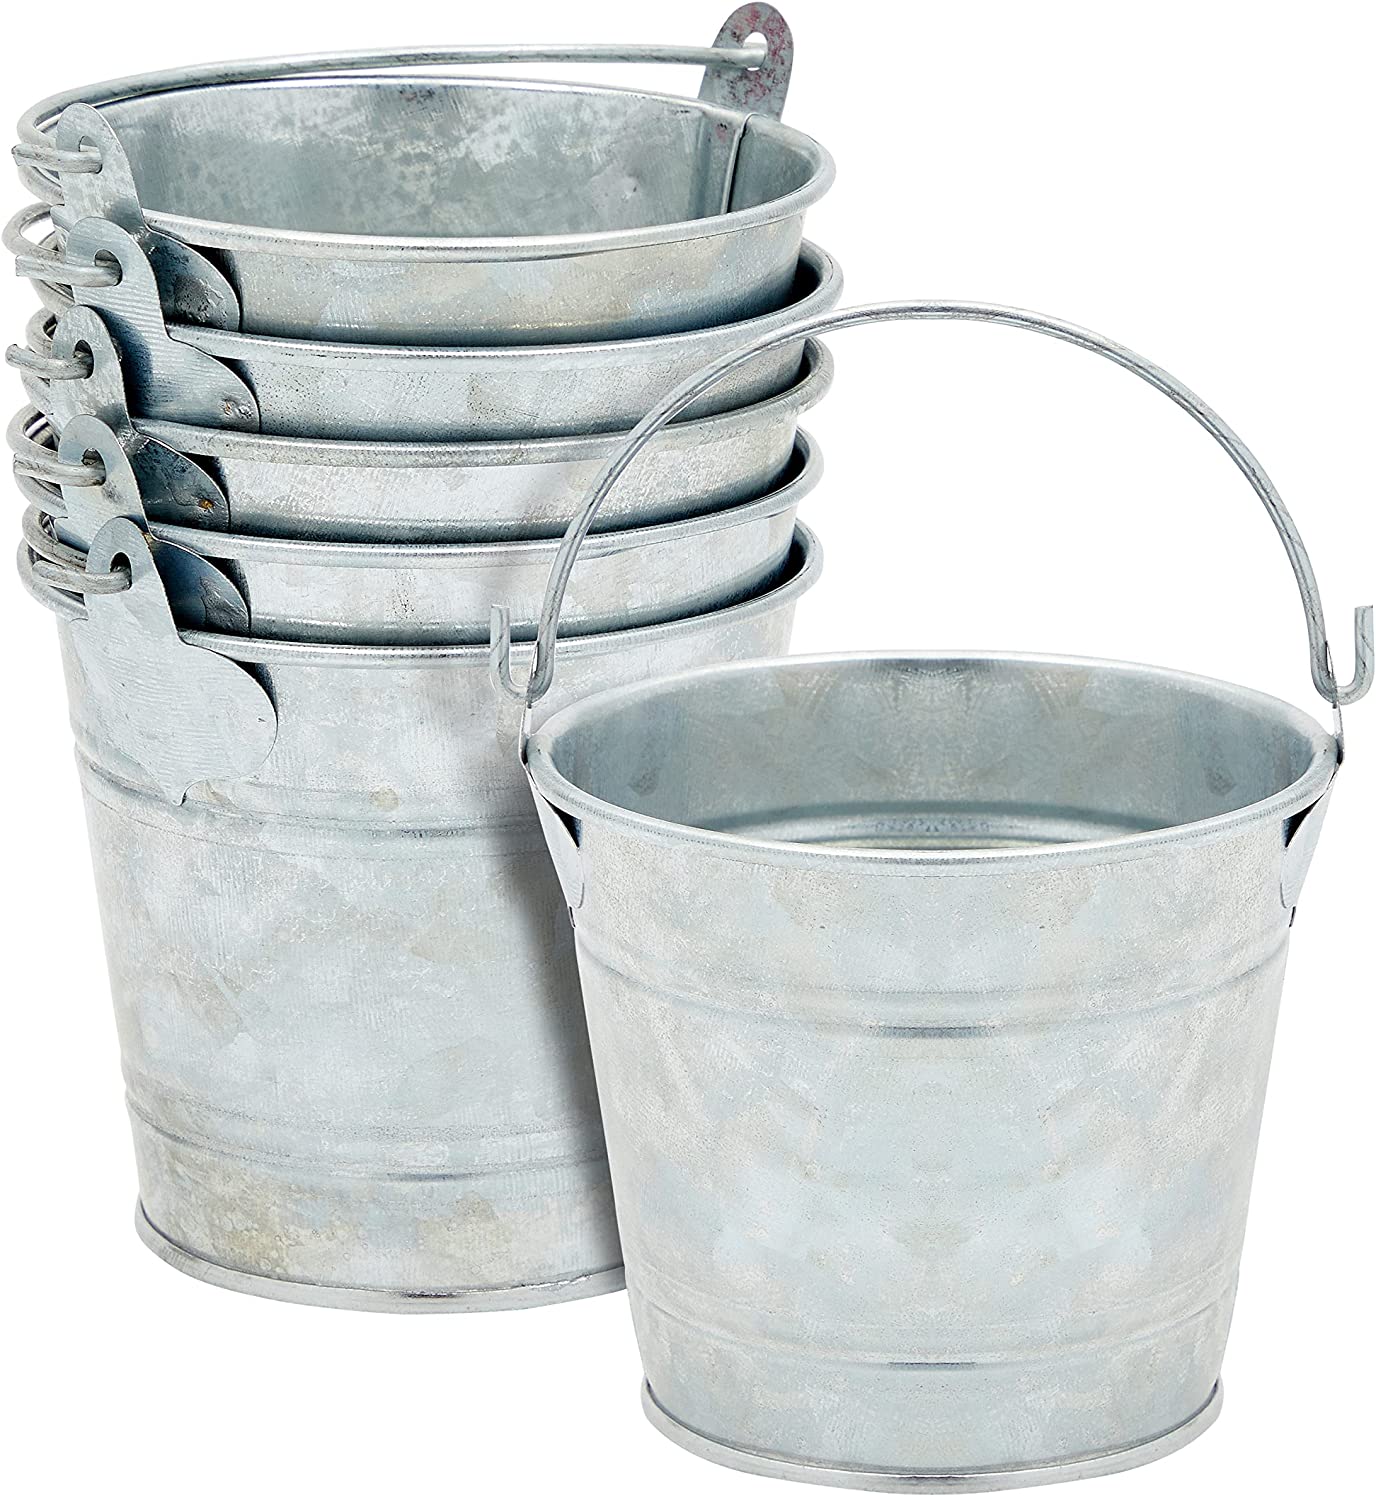 Galvanized buckets and tubs